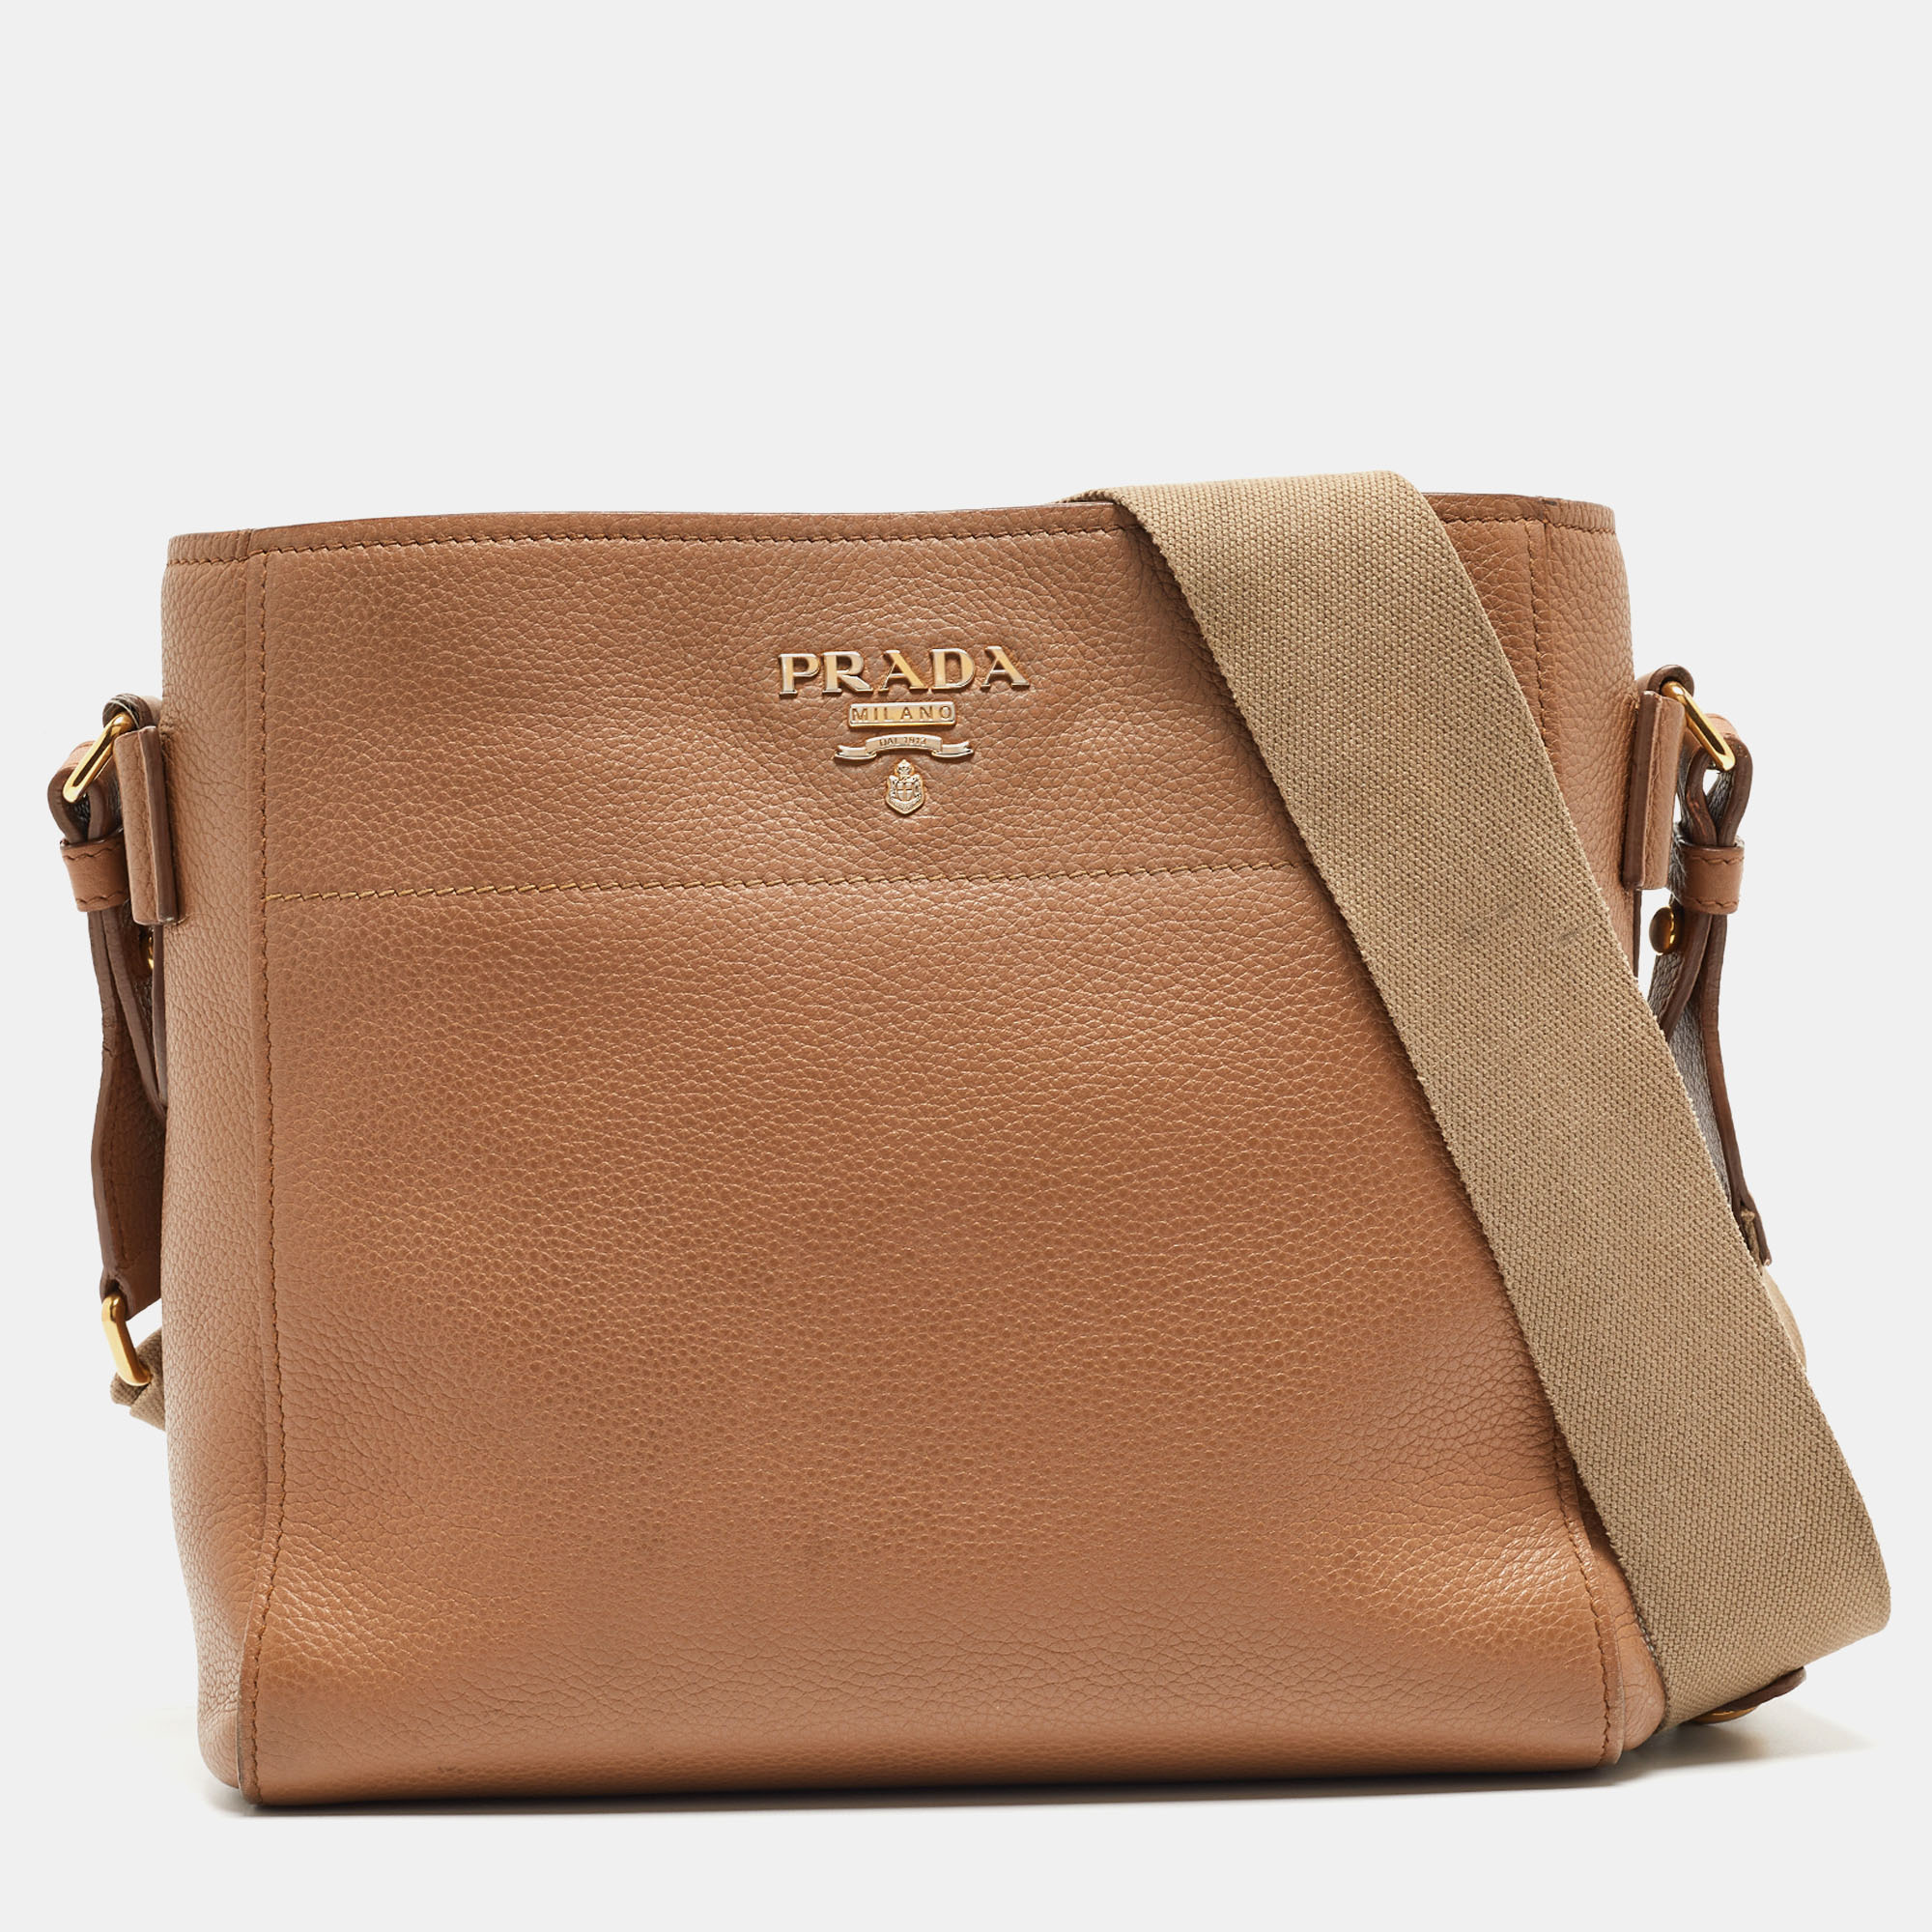 This bag from Prada adds a signature touch to your outfit and elevates its trend quotient. A piece like this brown bag will be your go to for most of the outfits in your closet. Look super cool and trendy by adorning this beautiful leather bag.